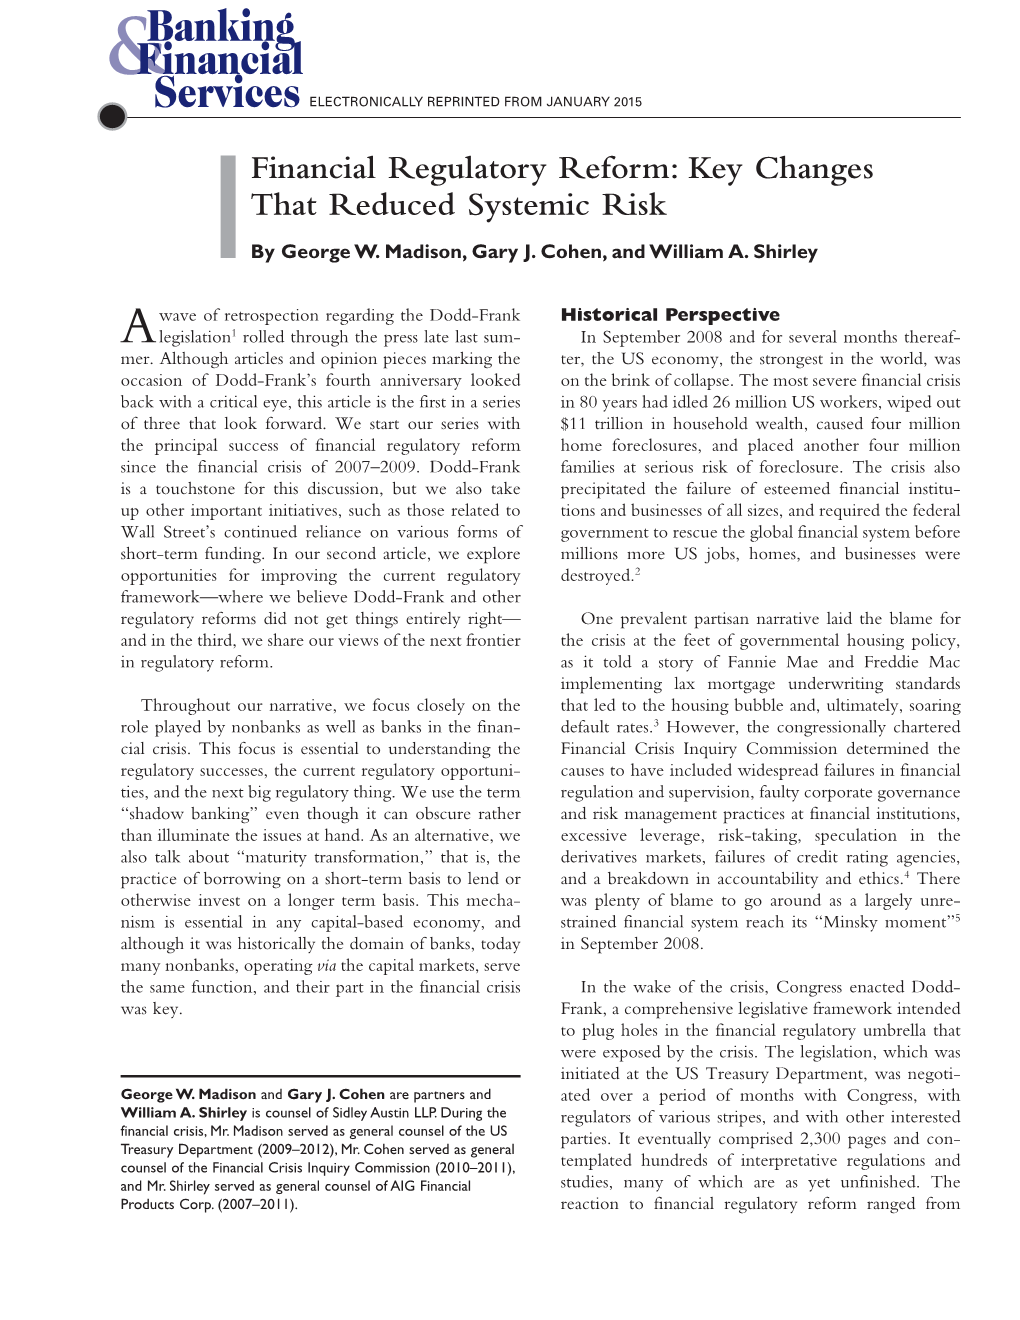 Key Changes That Reduced Systemic Risk